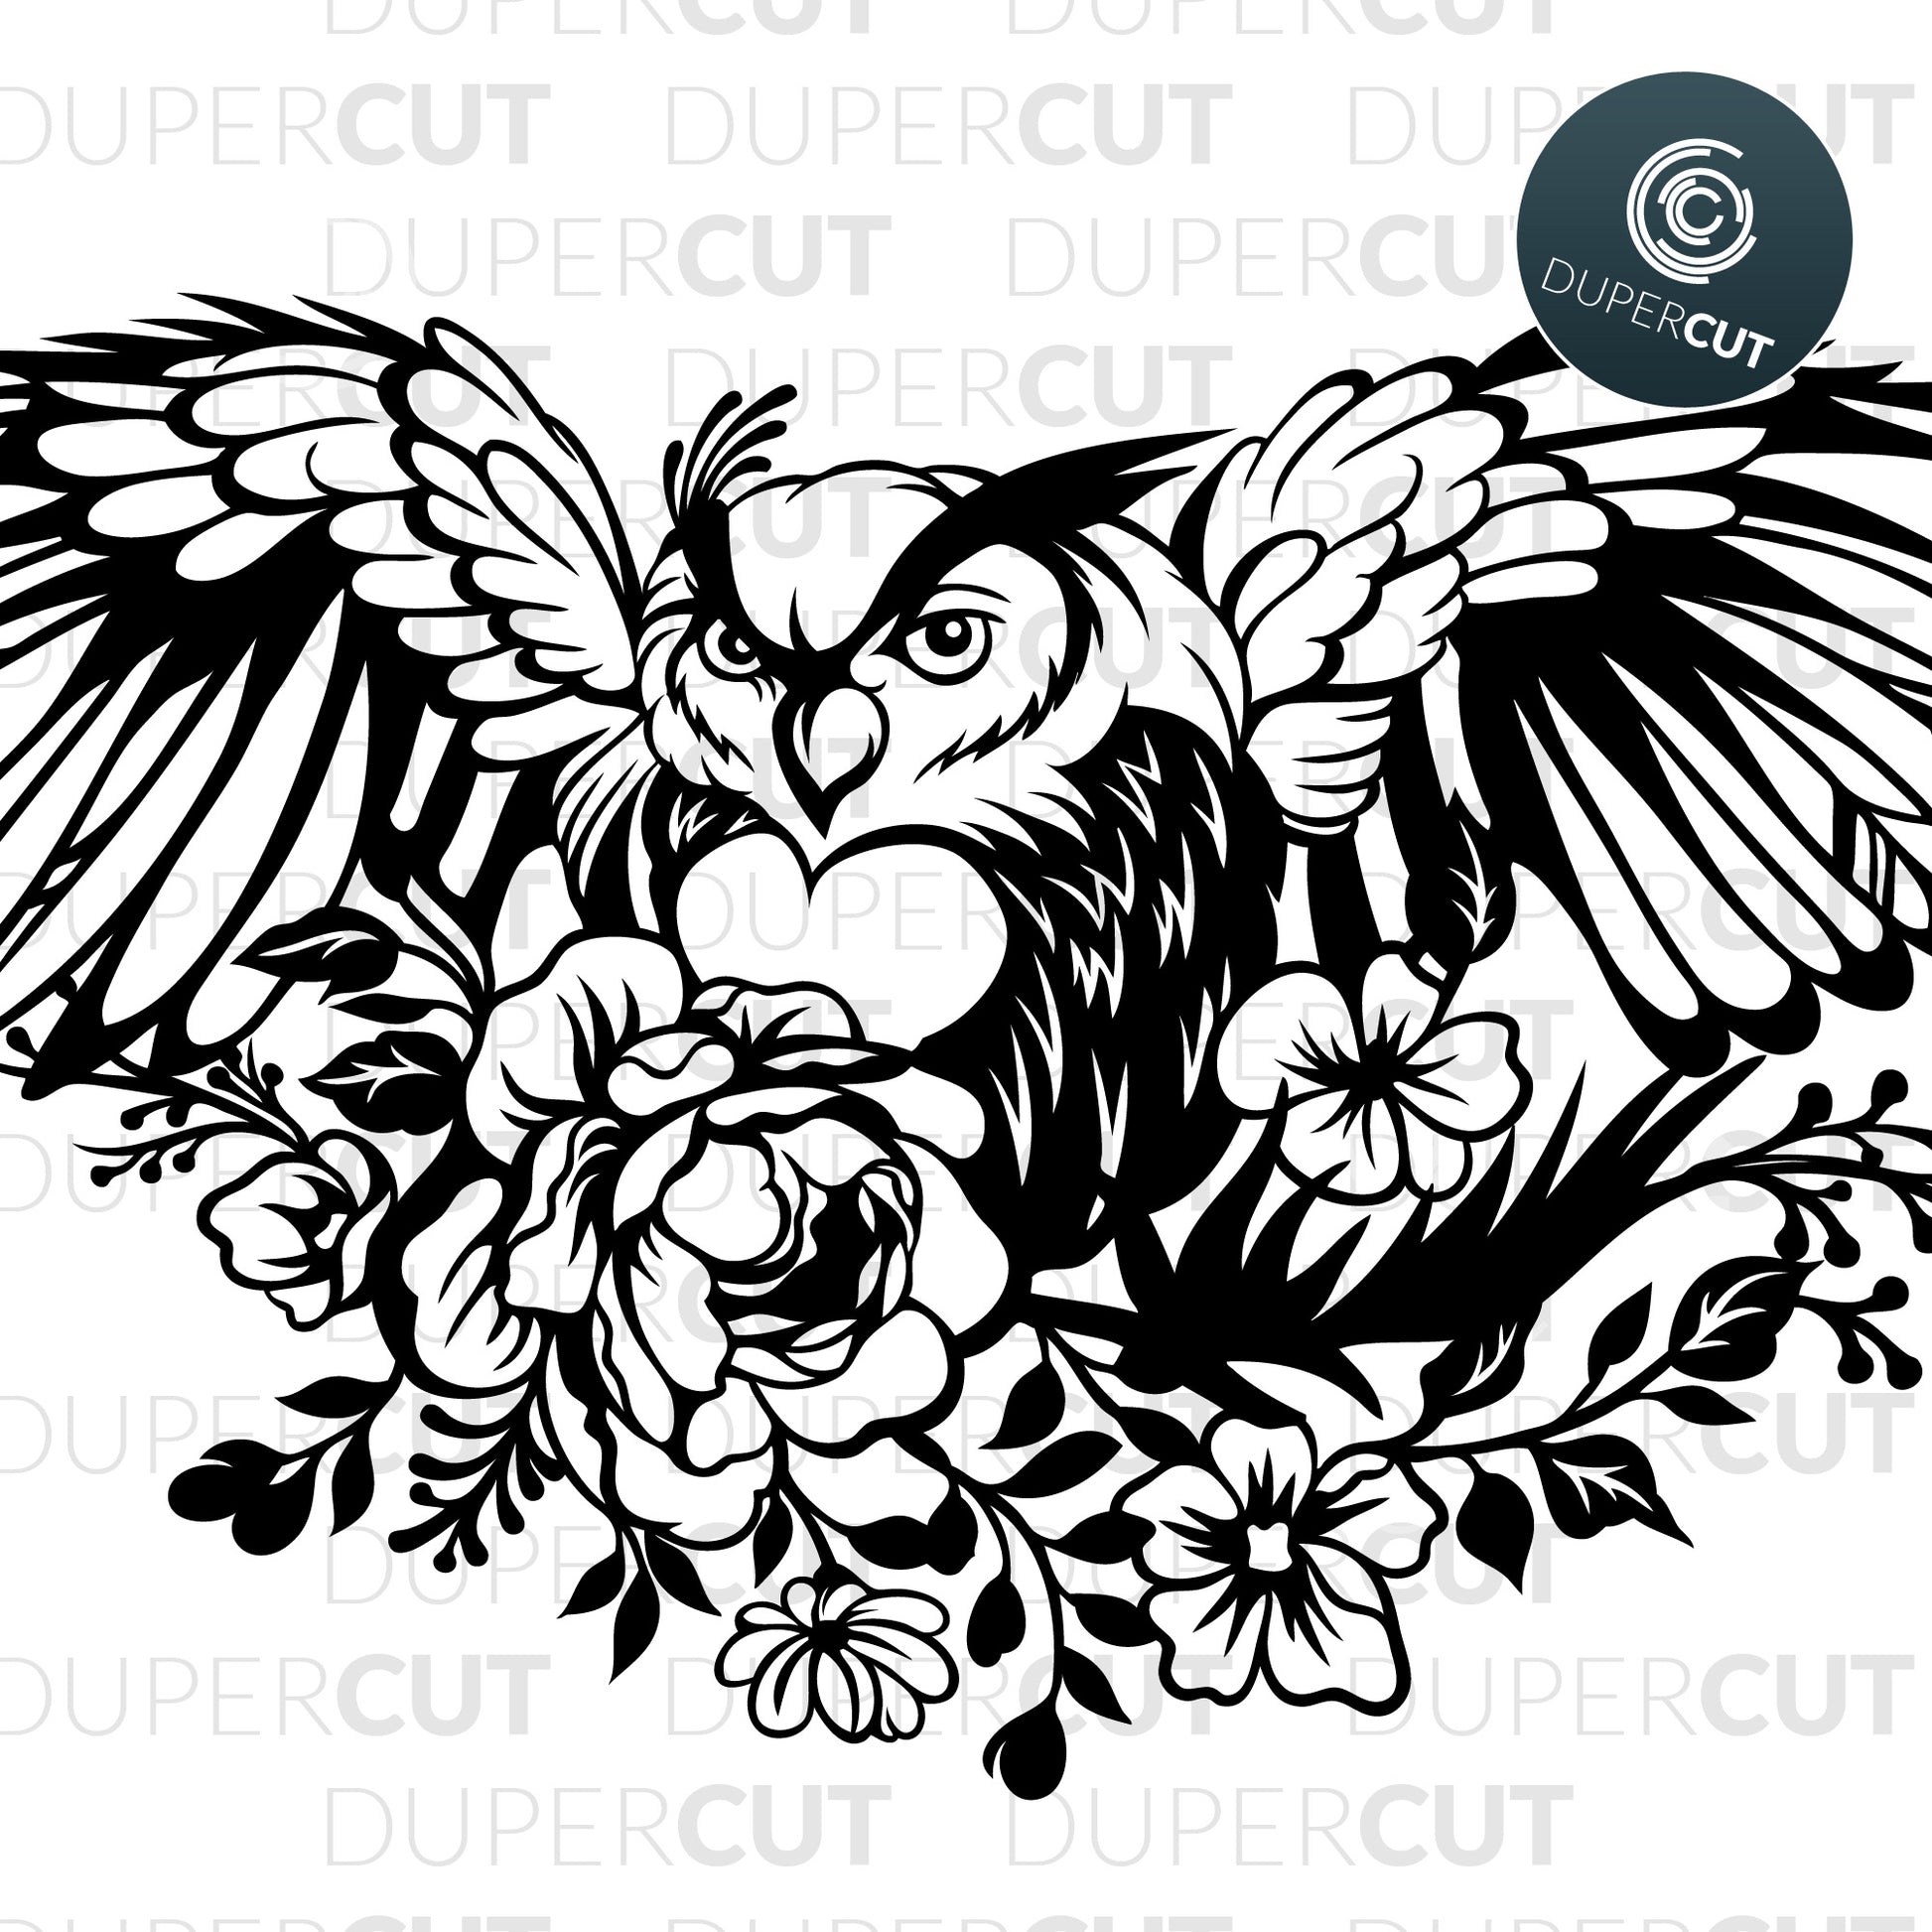 Owl with roses, tattoo style art - SVG DXF JPEG files for CNC machines, laser cutting, Cricut, Silhouette Cameo, Glowforge engraving